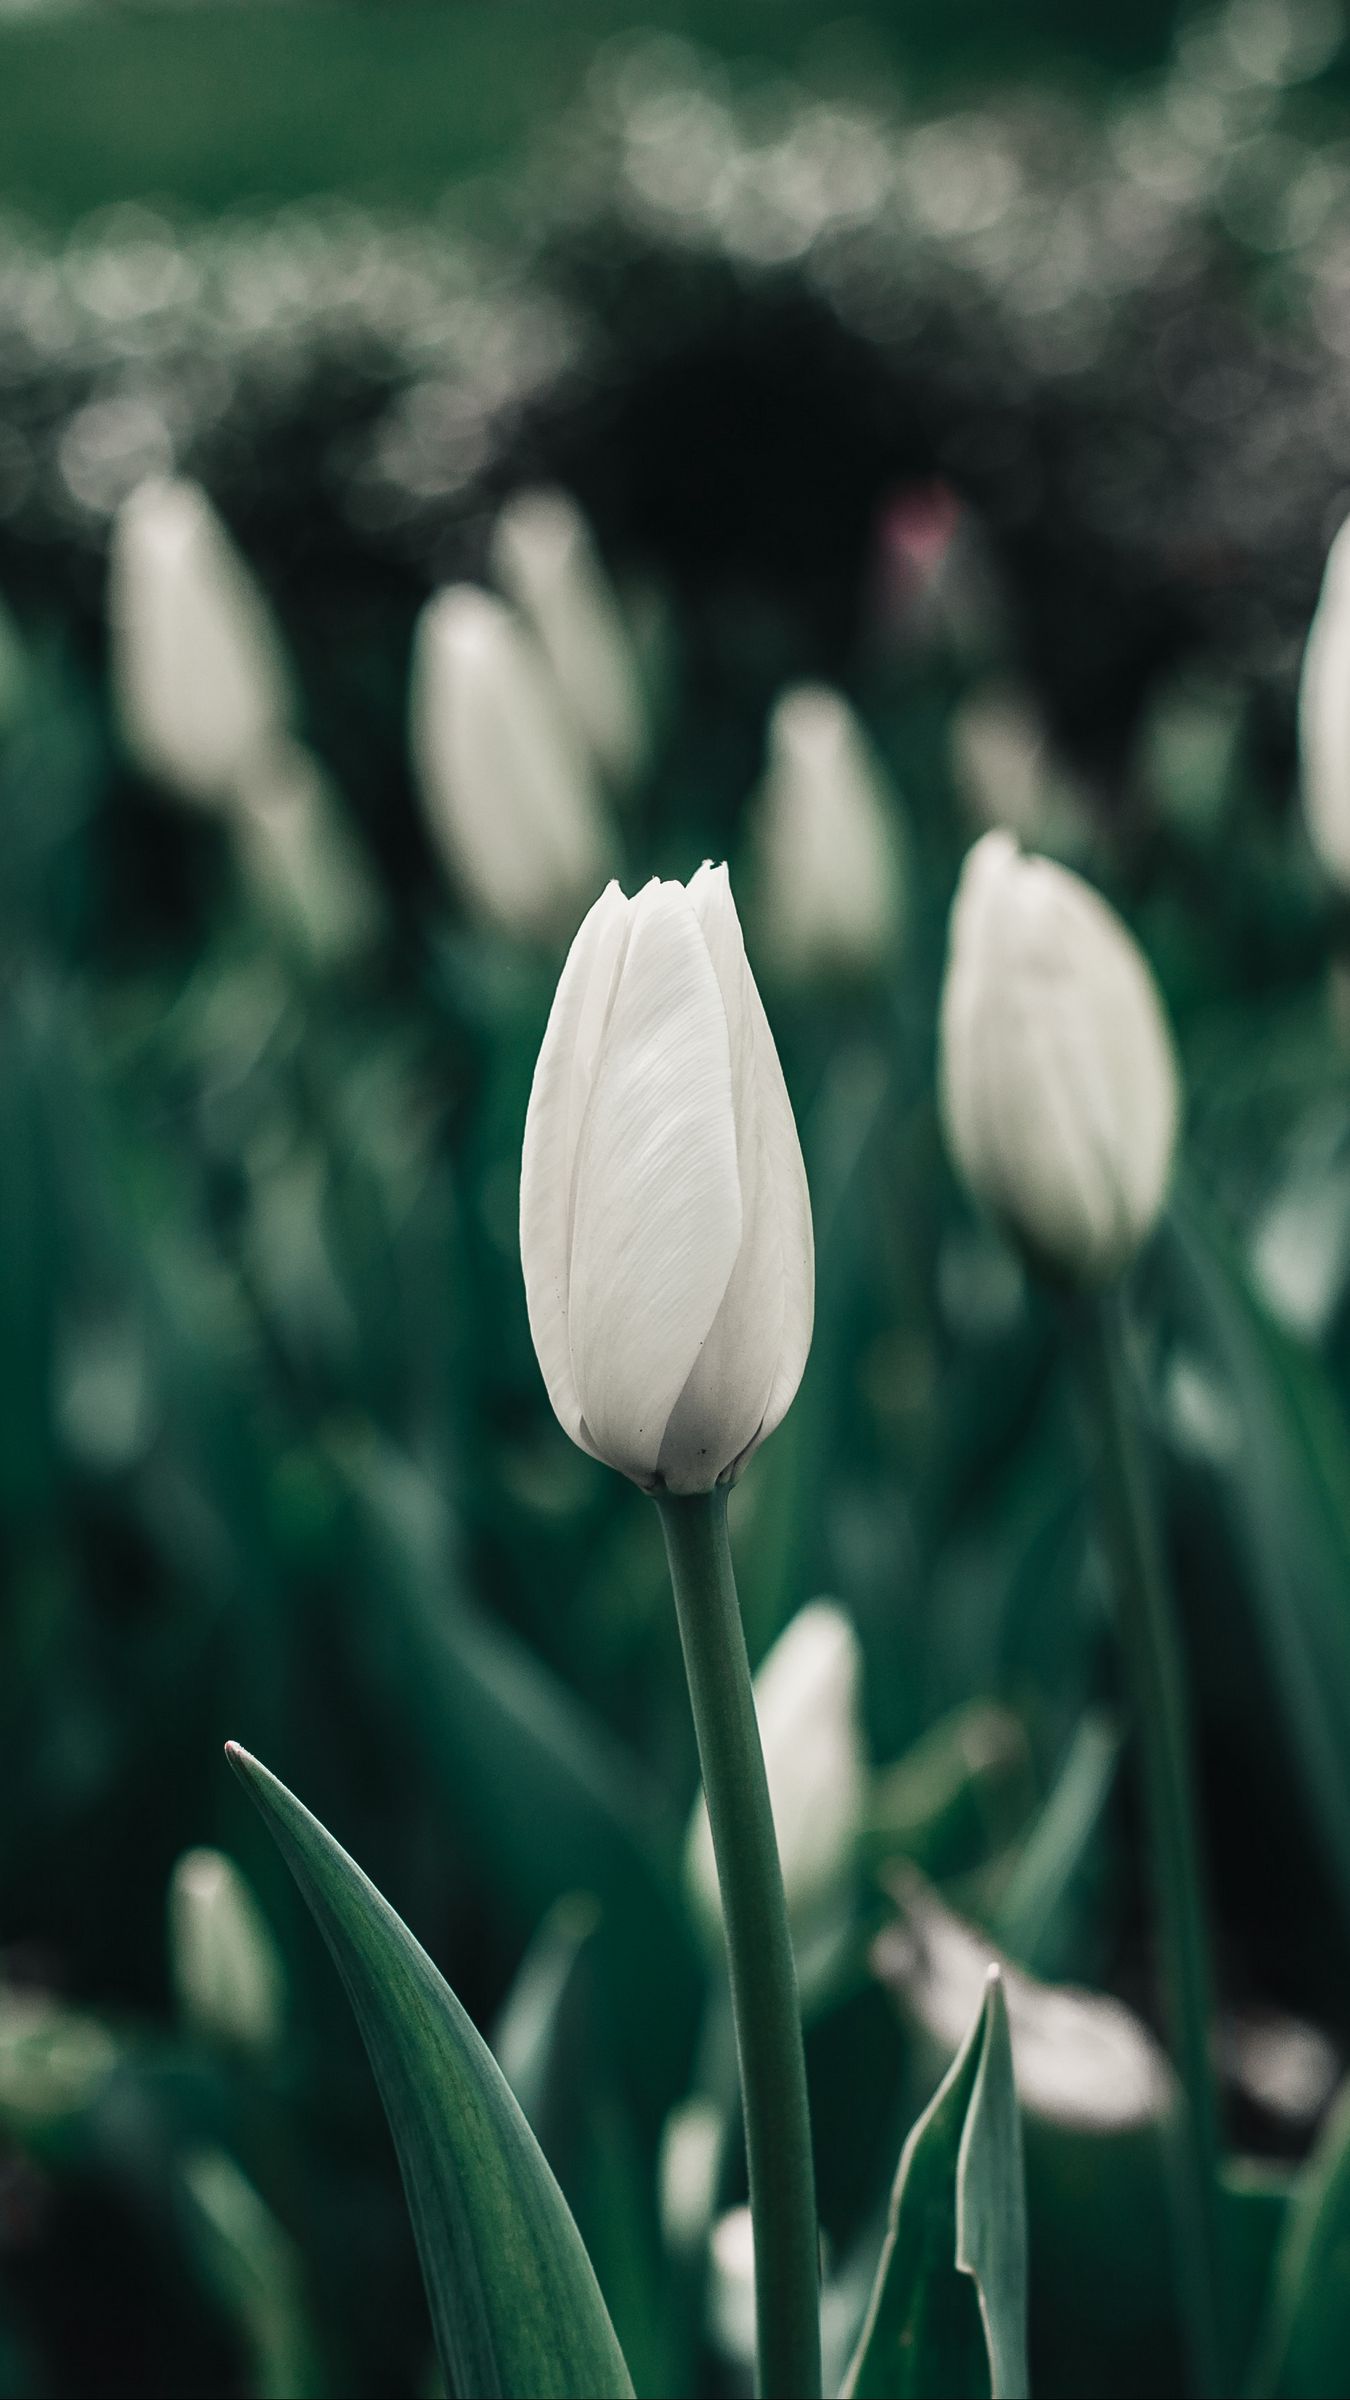 Download wallpaper 1350x2400 tulips, flowers, white, flowerbed, blooms, spring iphone 8+/7+/6s+/for parallax HD background